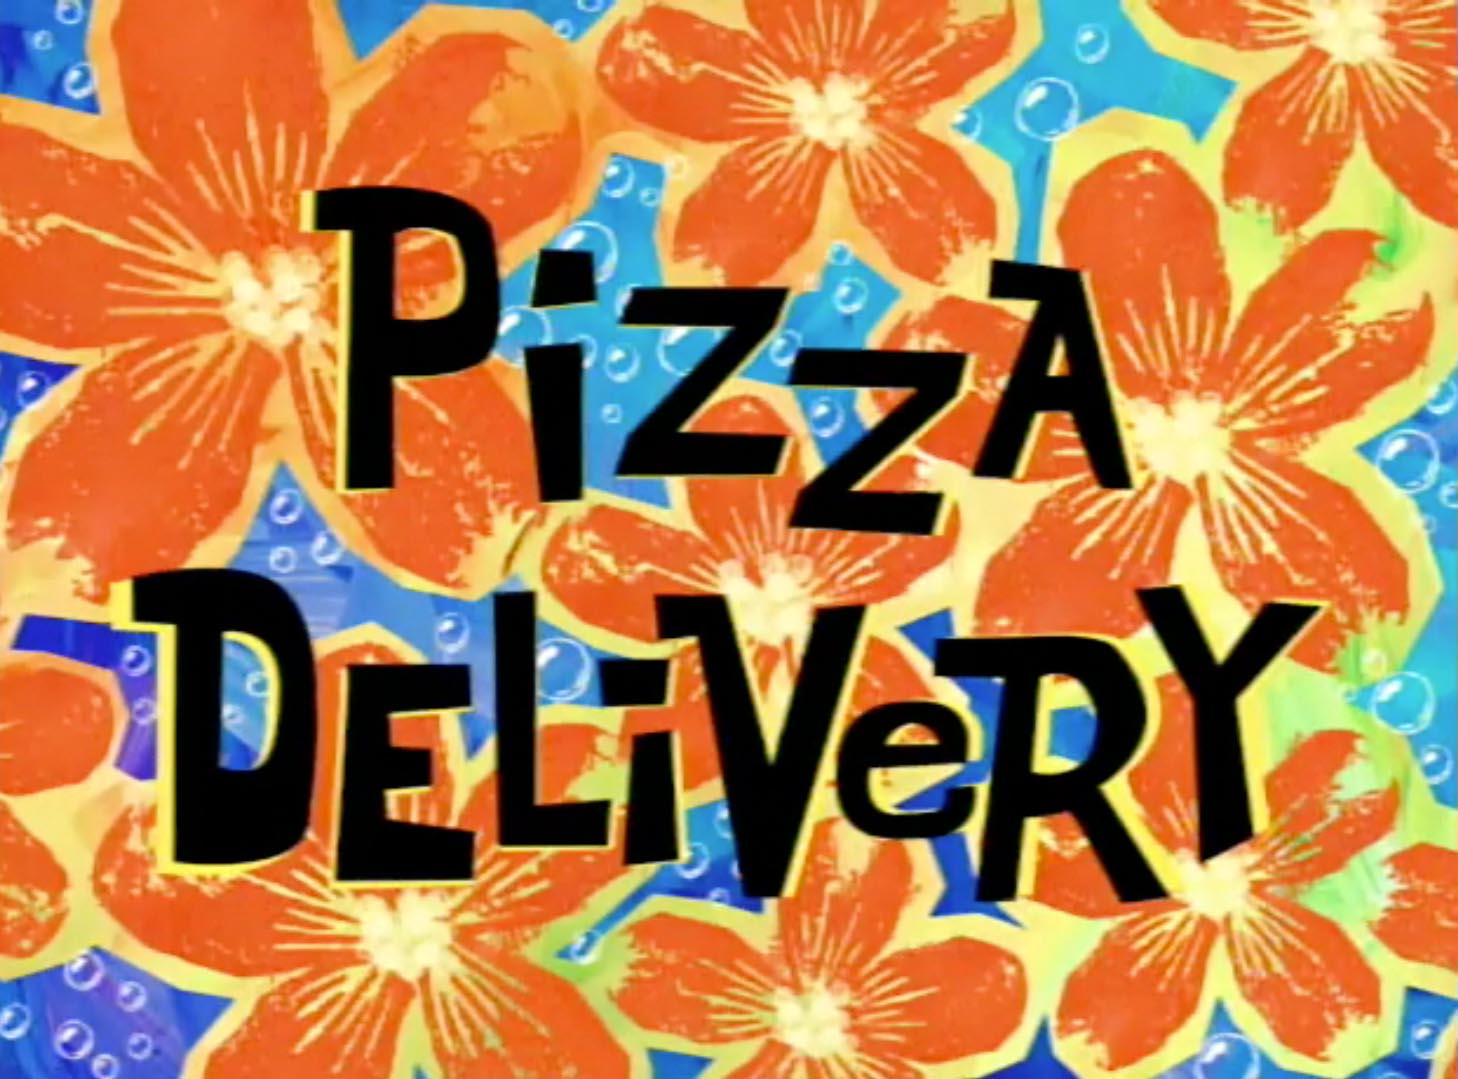 Pizza_Delivery.jpg